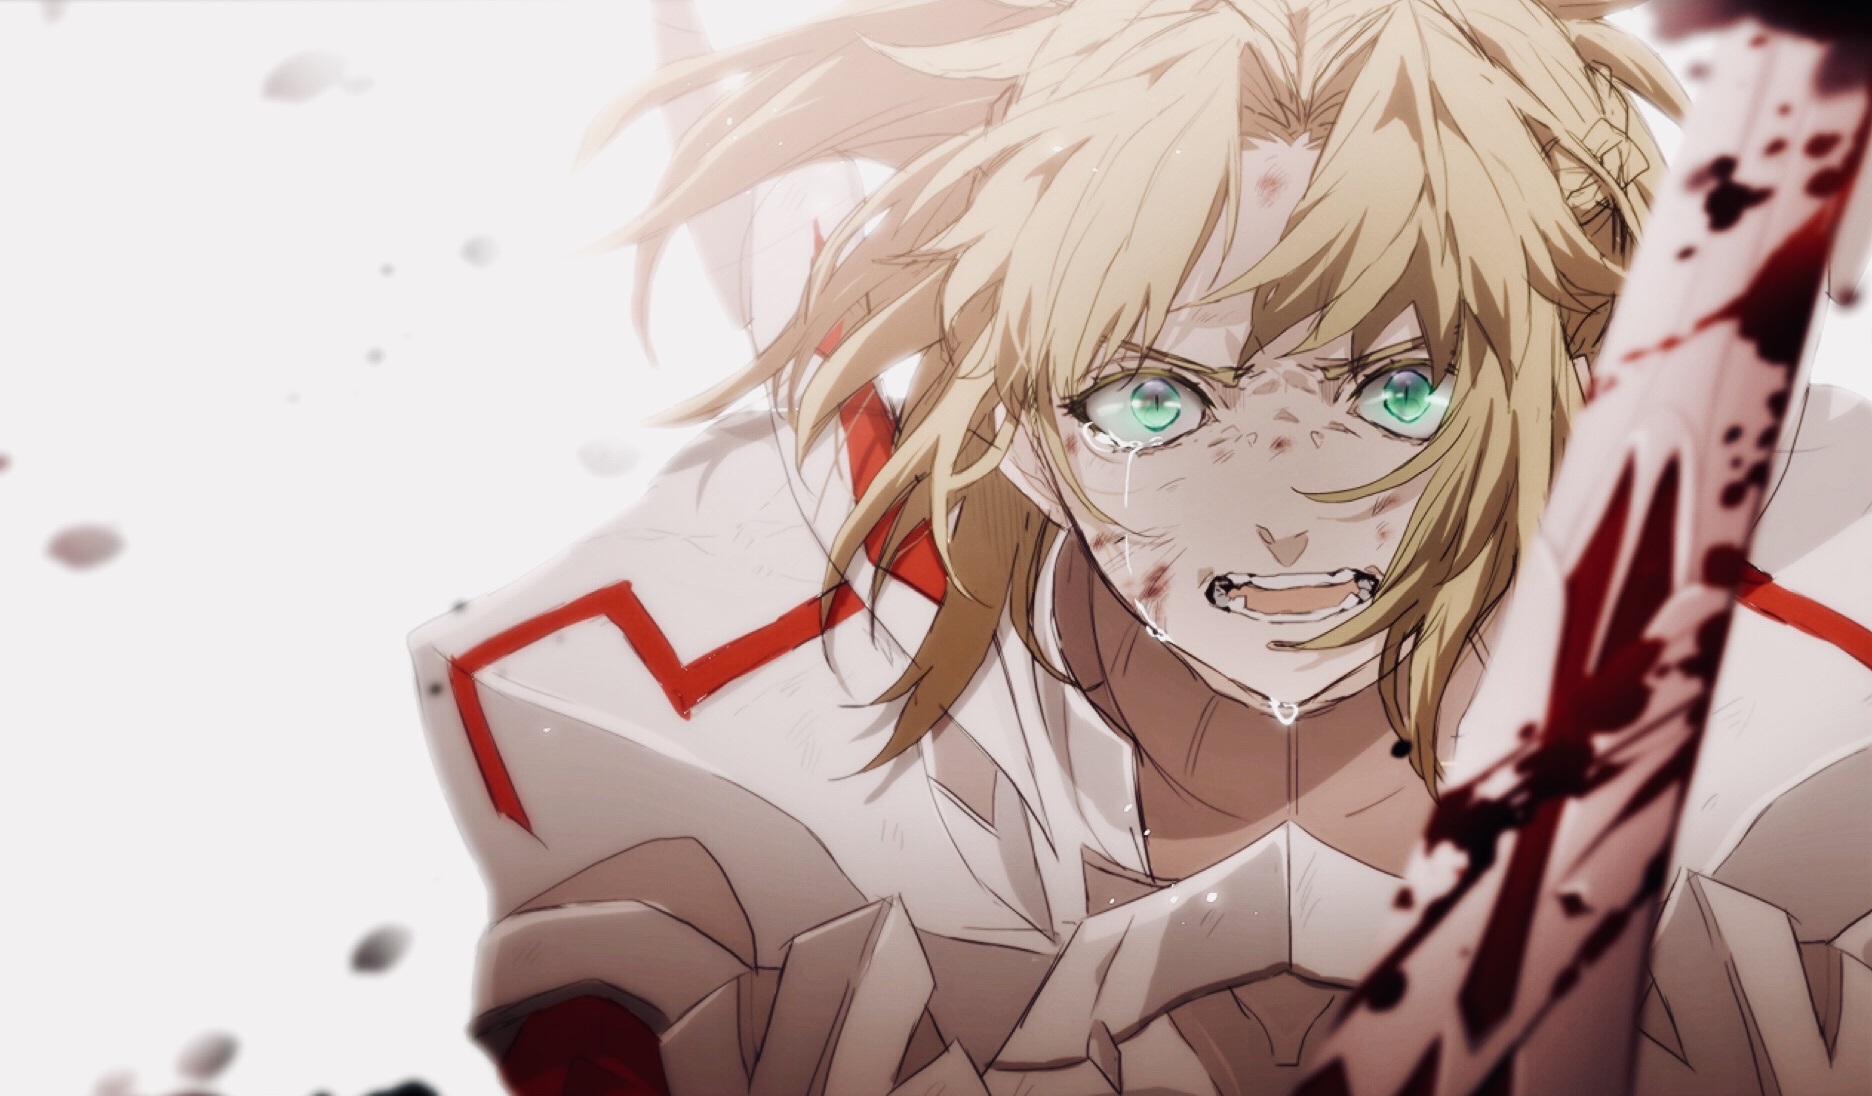 Saber Of Red Fate Apocrypha Mordred Fate Apocrypha 1872x1096